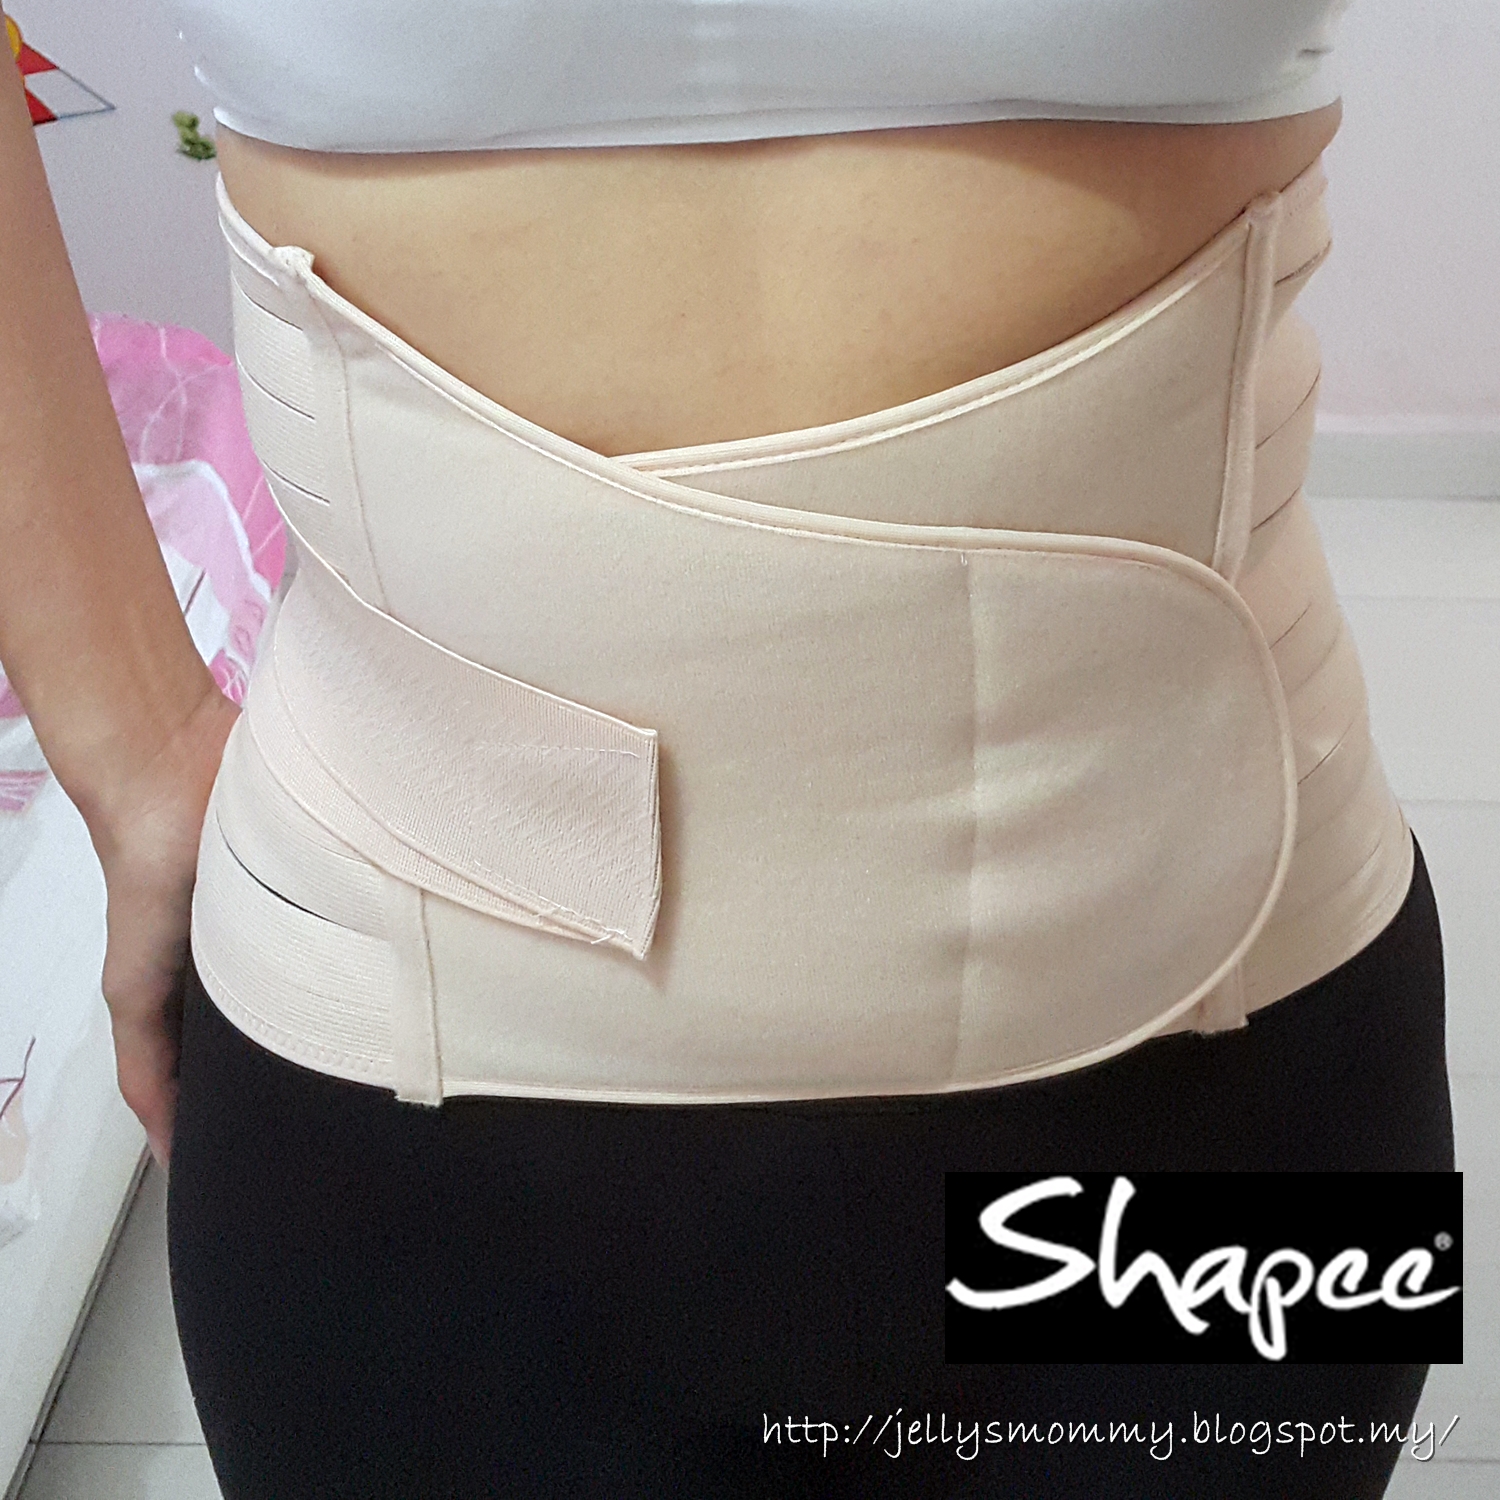 A little bit of Everything: Shapee Belly Wrap & Hips Wrap Plus+ Review